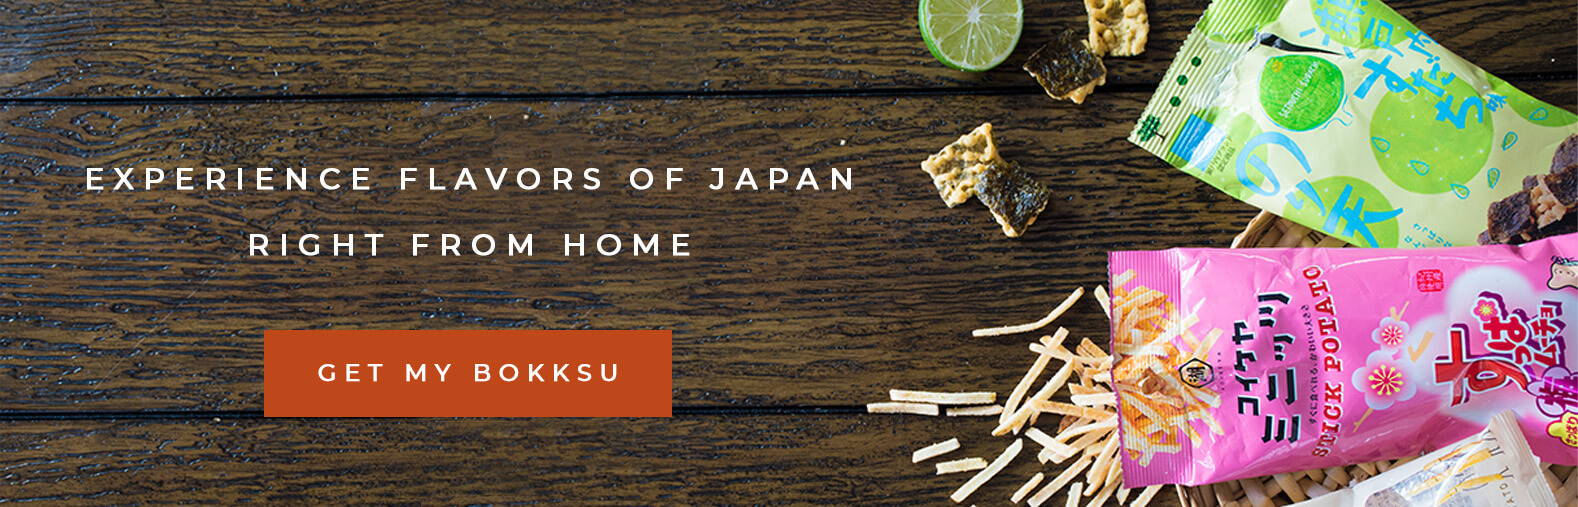 Experience flavors of Japan right from home